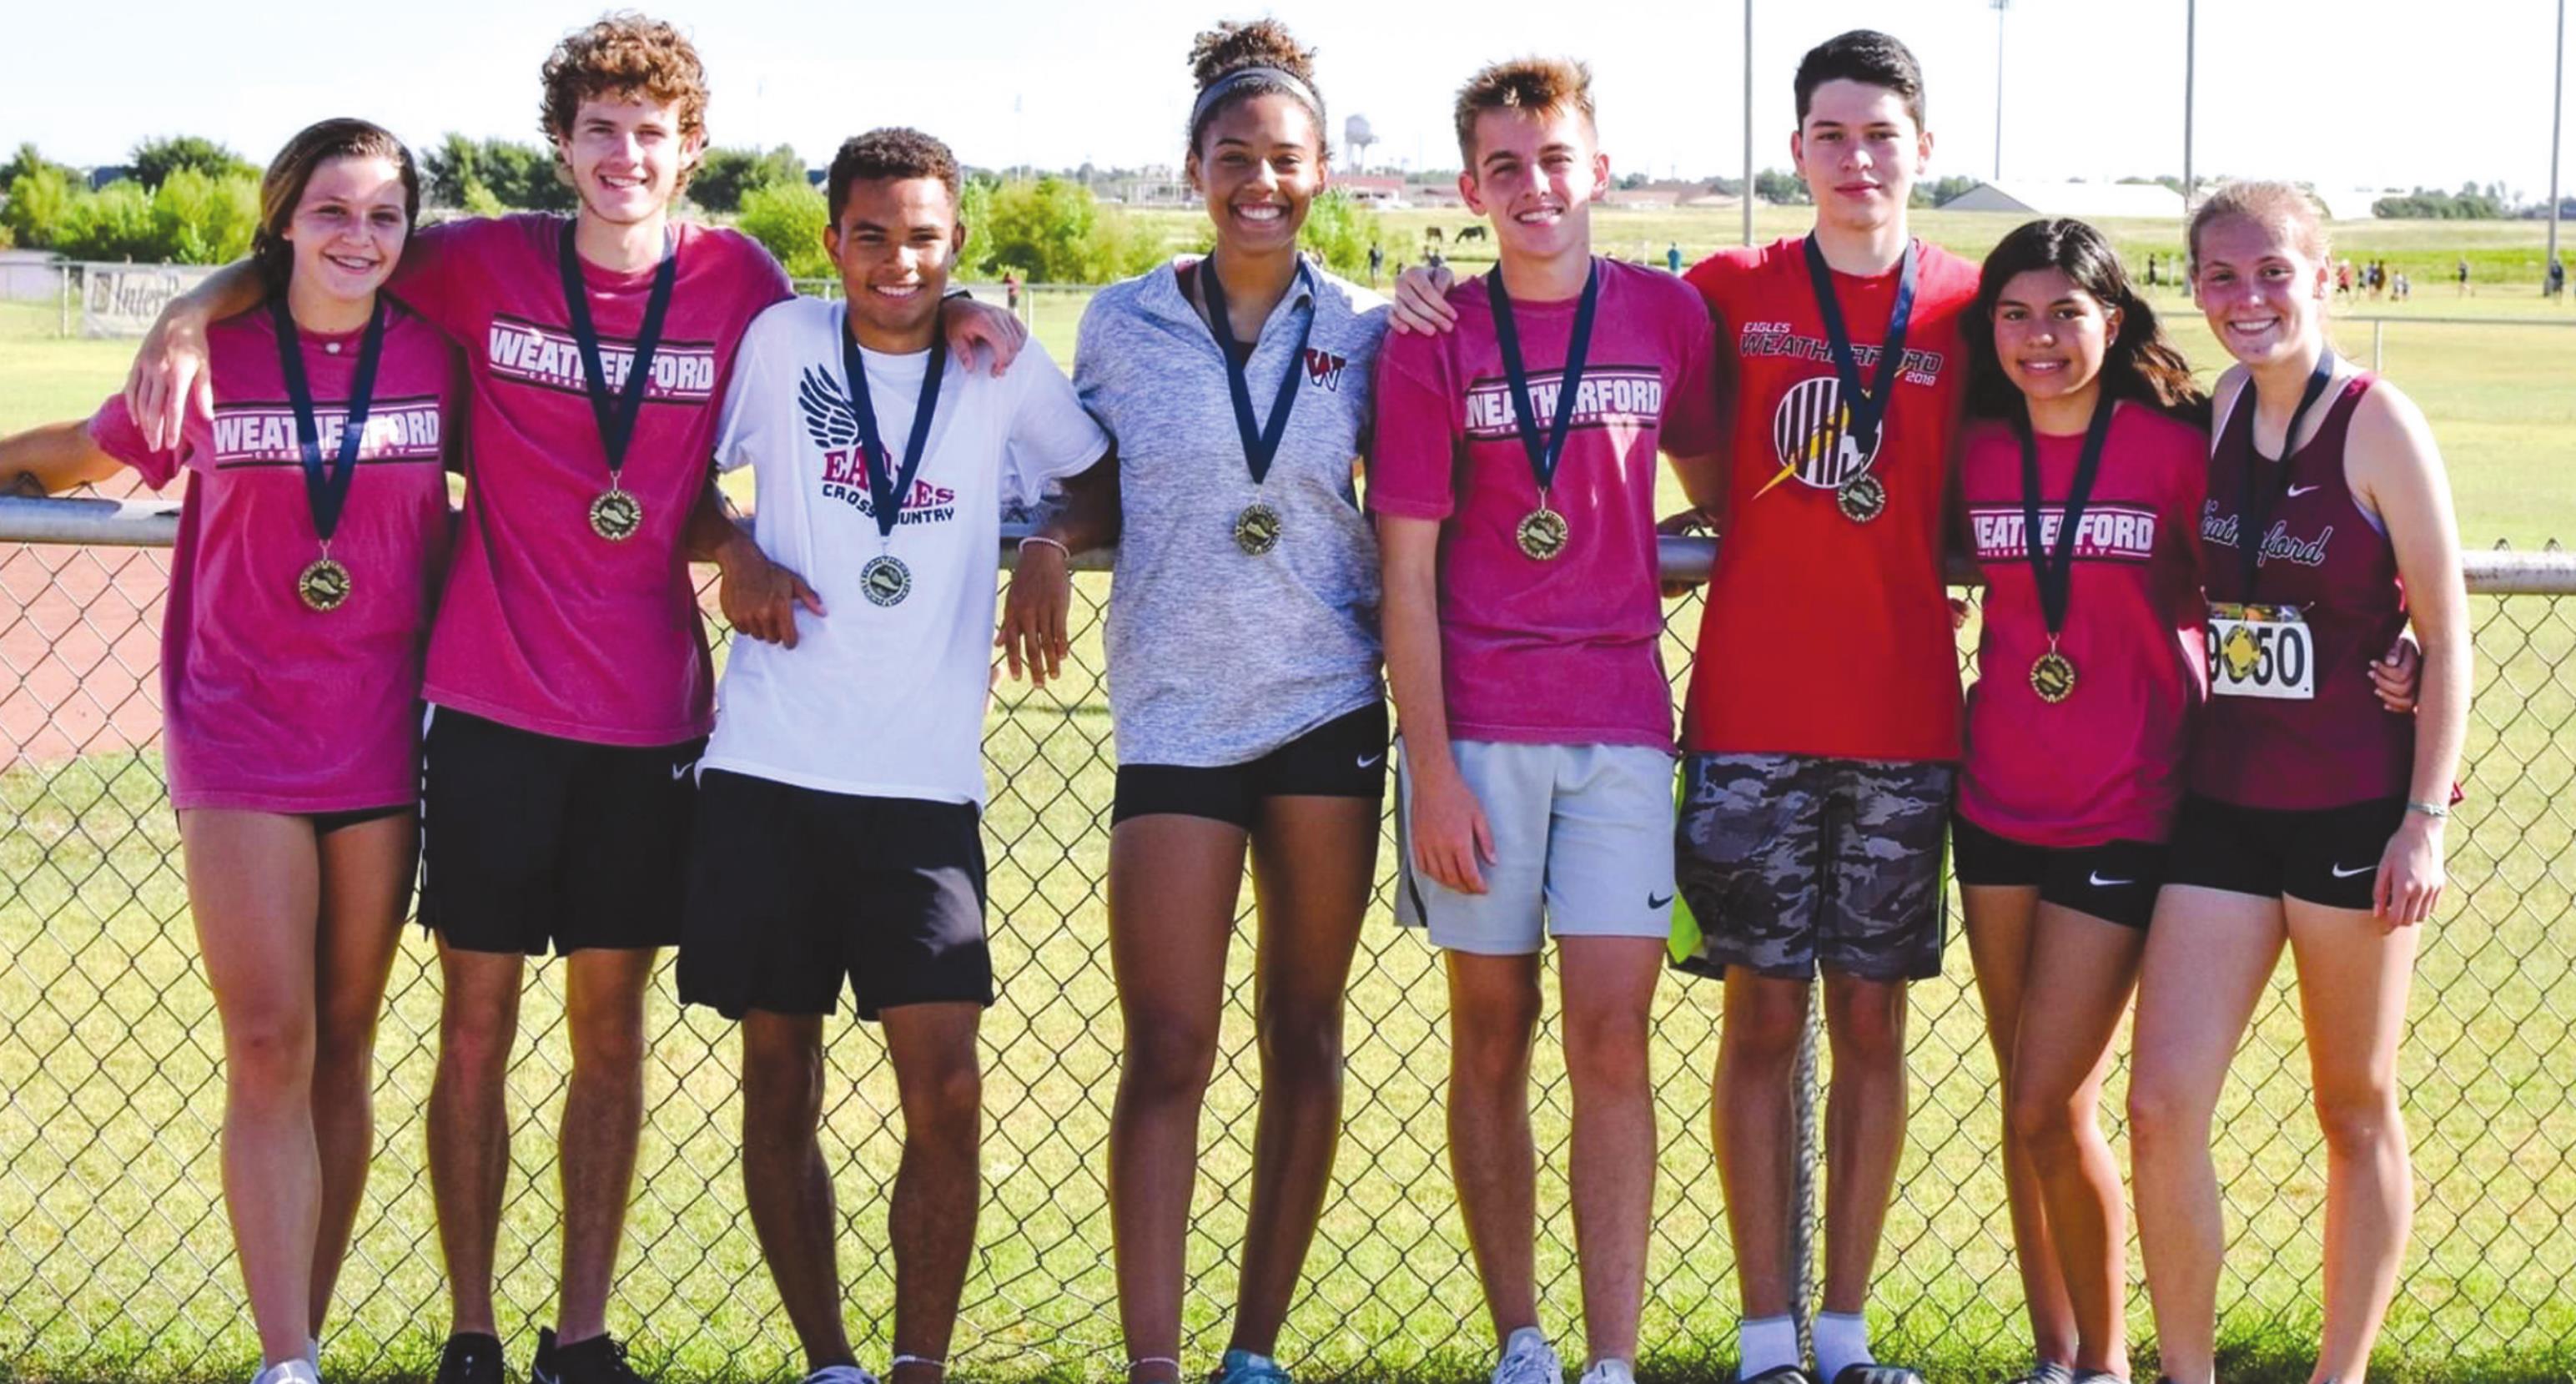 Weatherford teams finished second and third Saturday’s cross country meet at Kingfisher. From left is Jordan Hoffman, Grant Christian, Garry Rose, Kennadi Price, AJ Stevenson, Alberto Arrieta, Ana Arrieta and Morgan Mouse. Provided